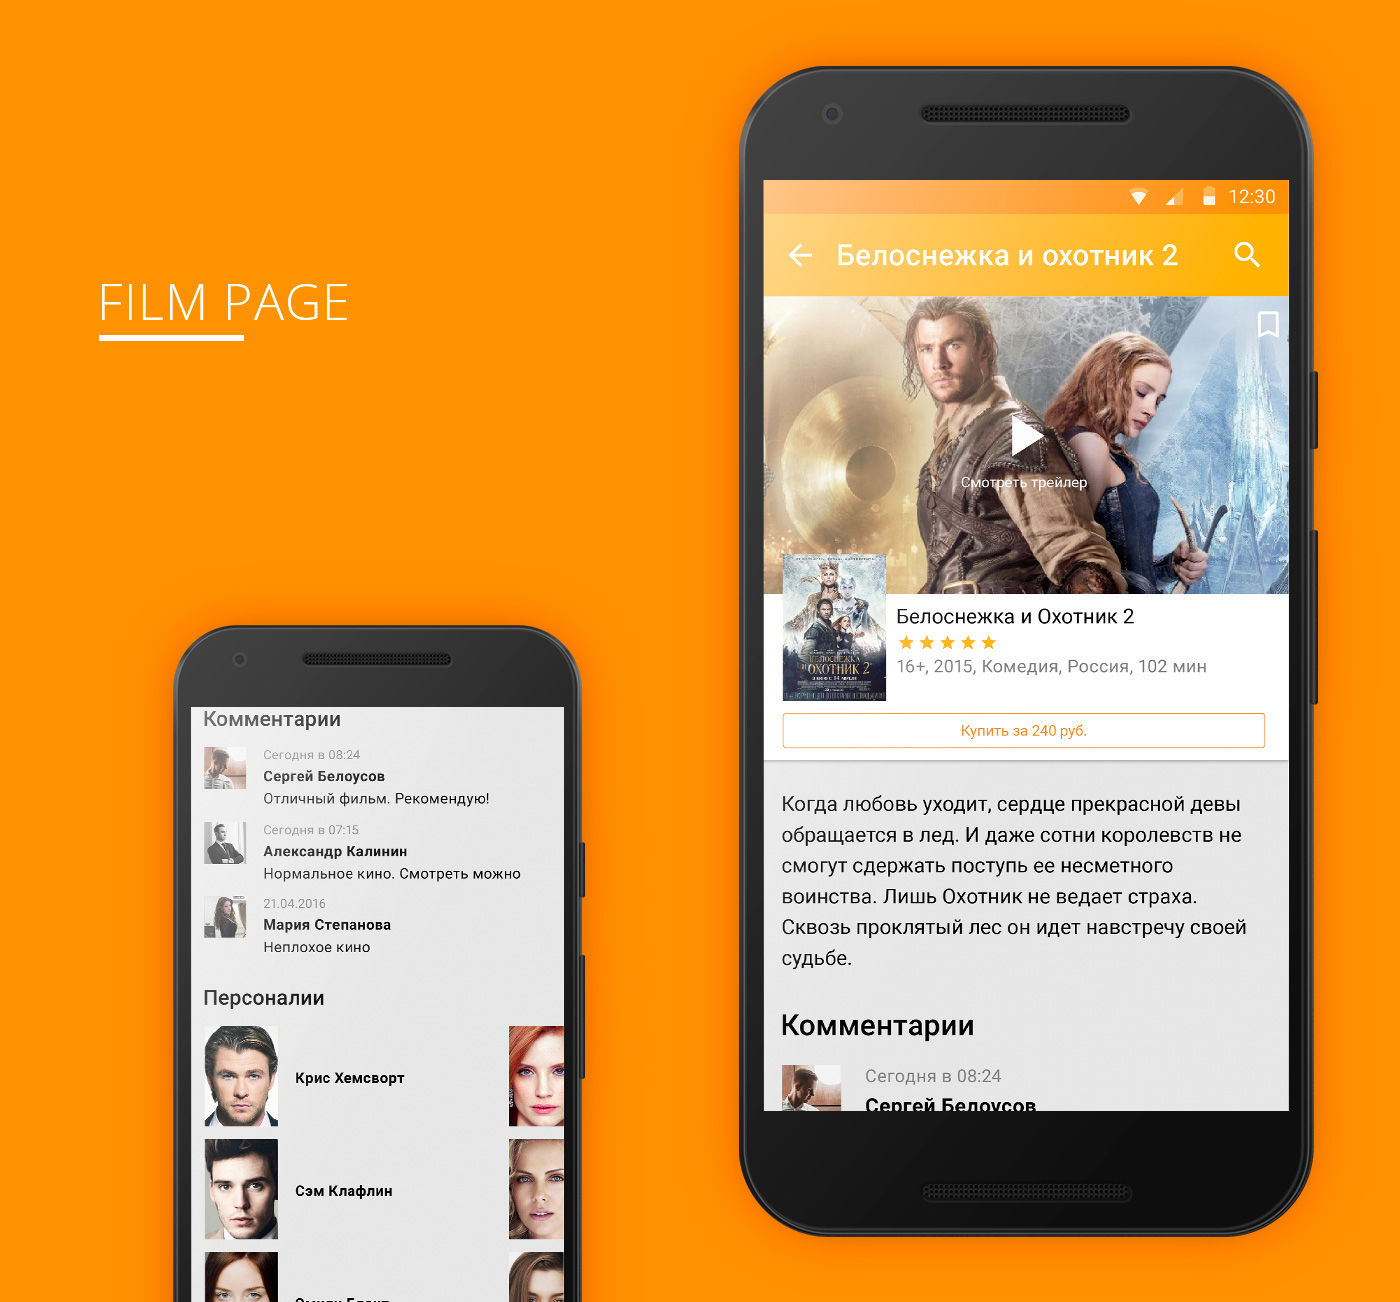 online movies app Mobile apps mobile disign disign